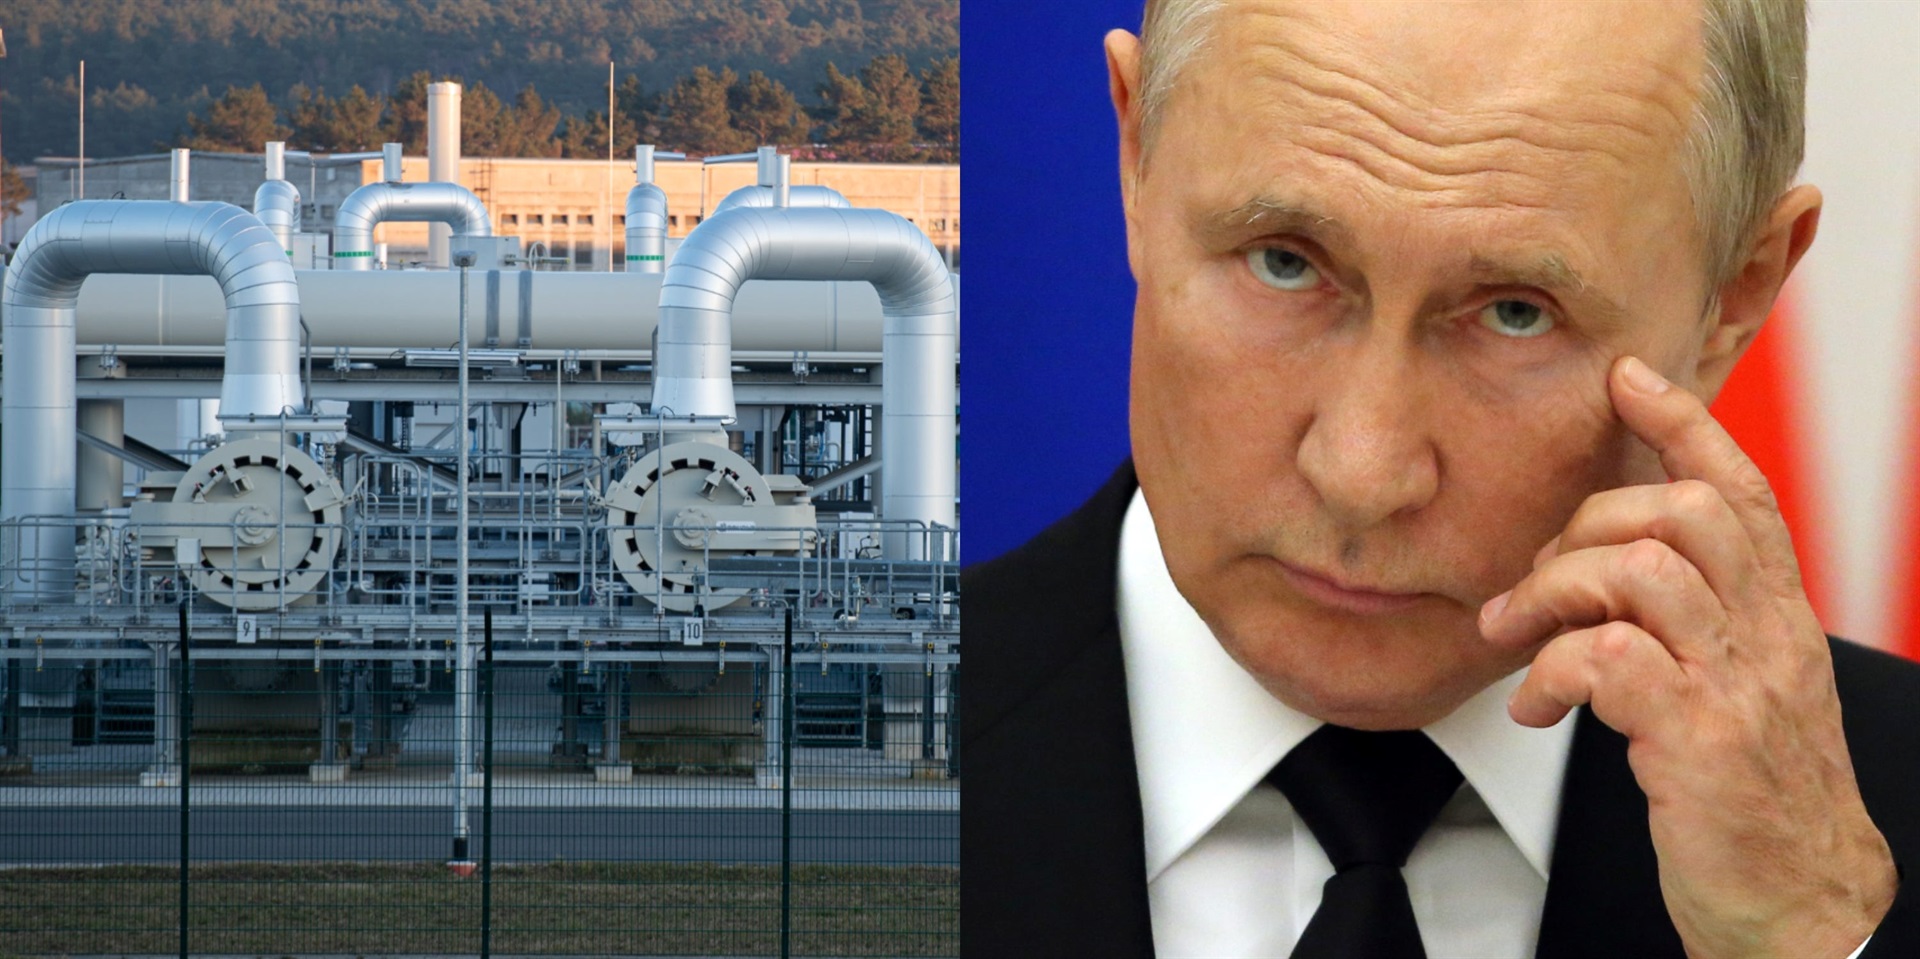 A composite image of part of the Nord Stream gas pipeline and Russian President Vladimir Putin. Daniel Reinhardt/Picture Alliance via Getty Images